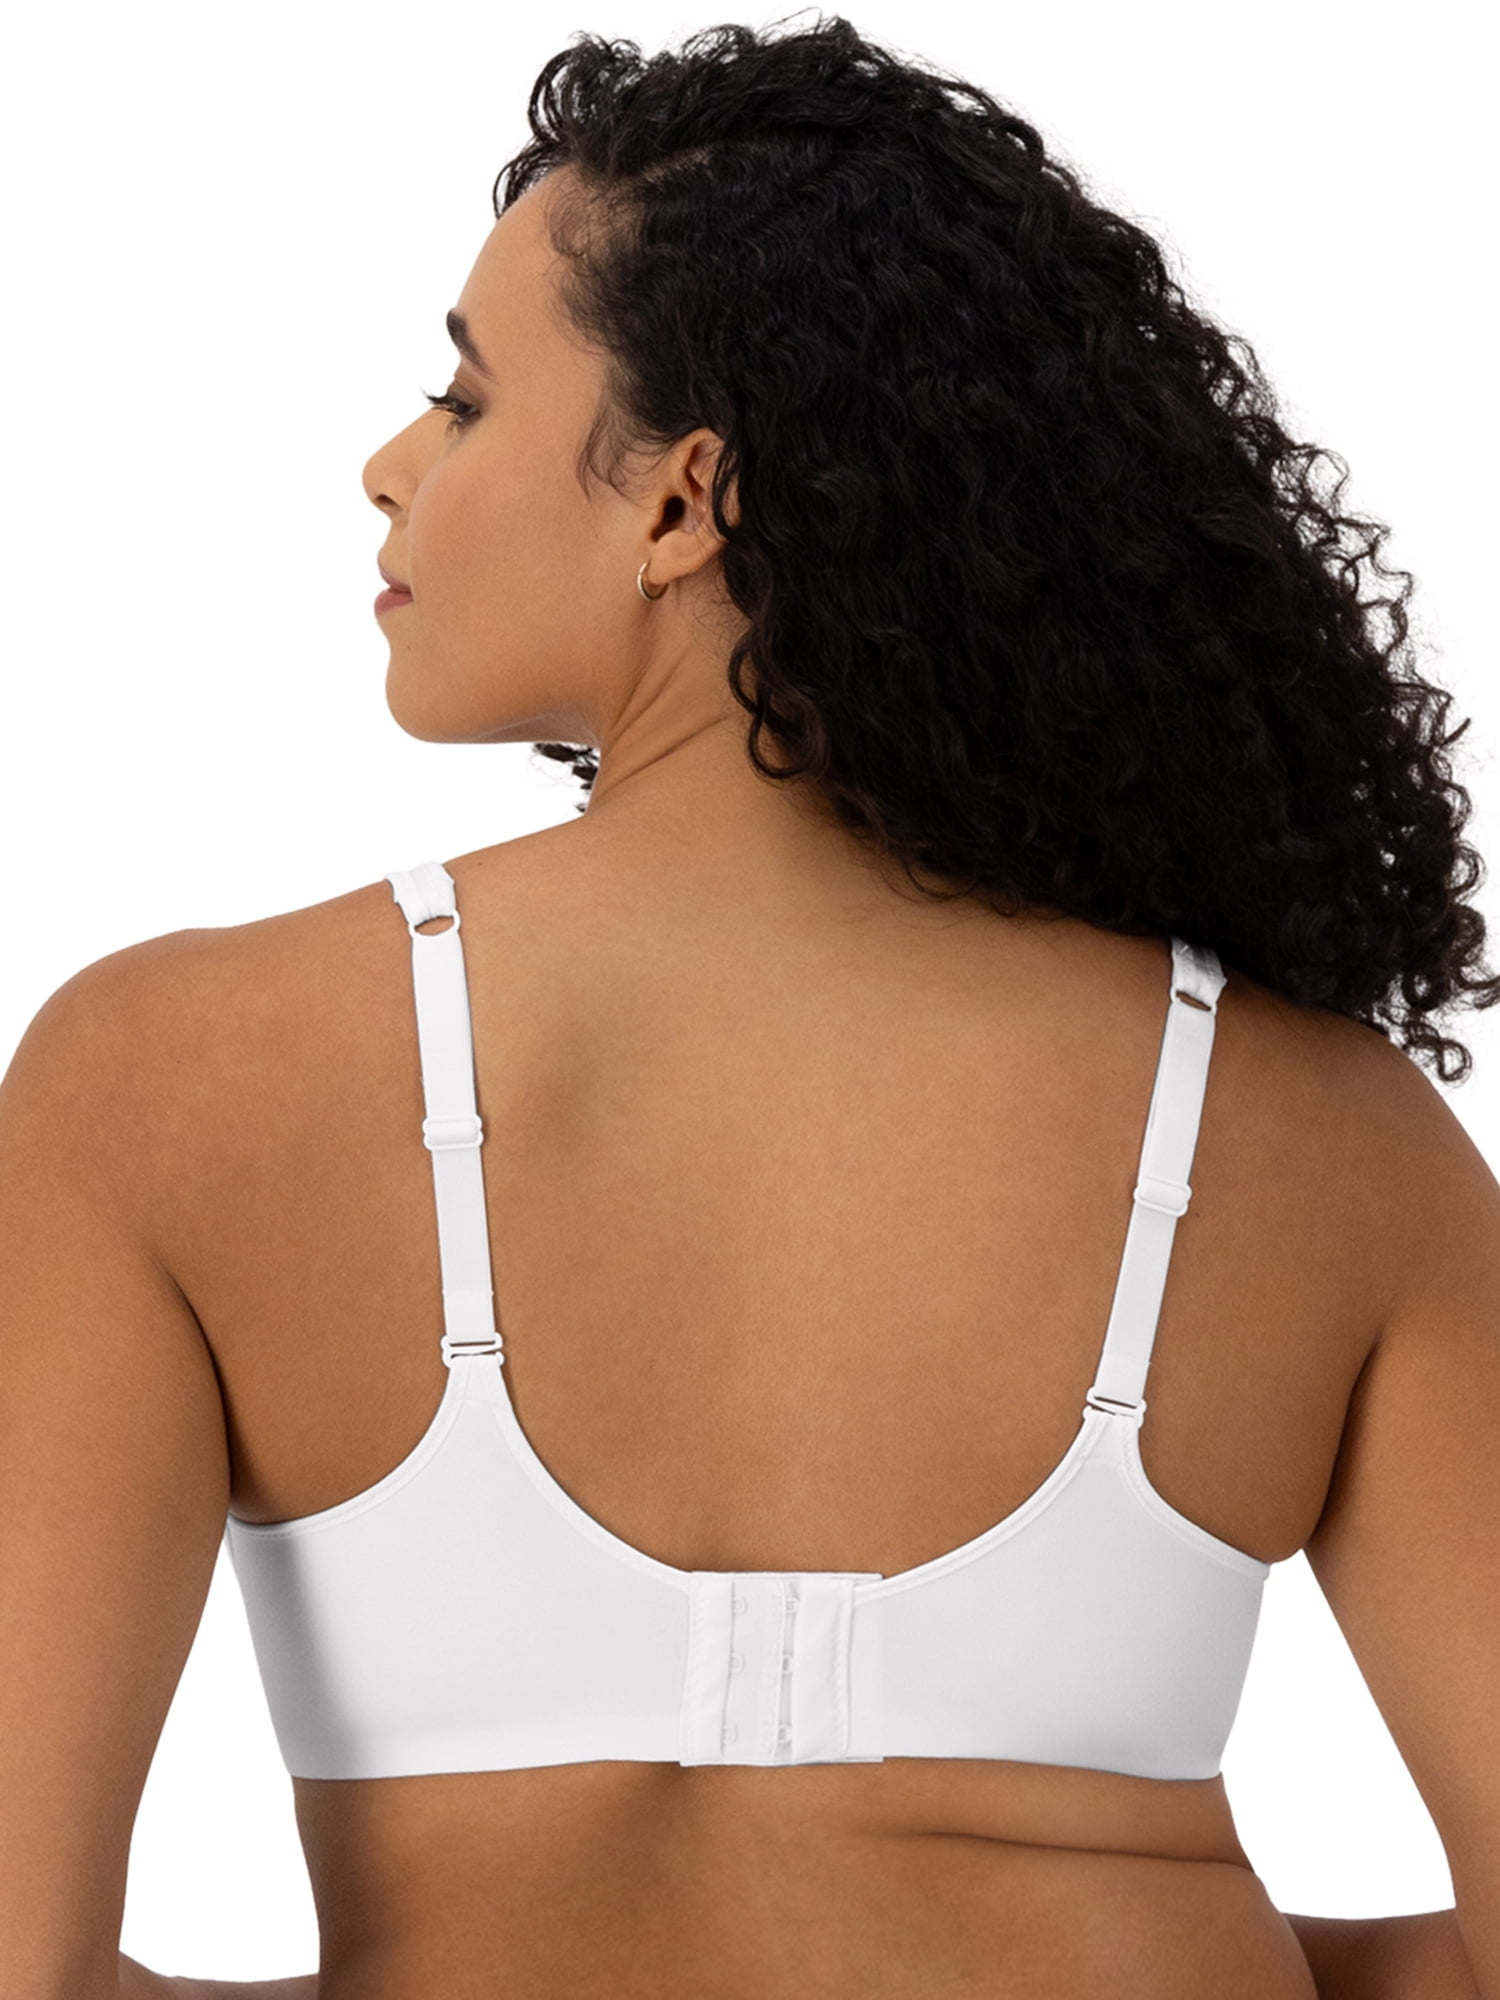 Belle Lingerie - Simple yet effective! 😘 With the Ultimate Backless Bra by  Wonderbra, you can finally wear your favourite backless dresses! It is also  underwired for great support, lightly padded for